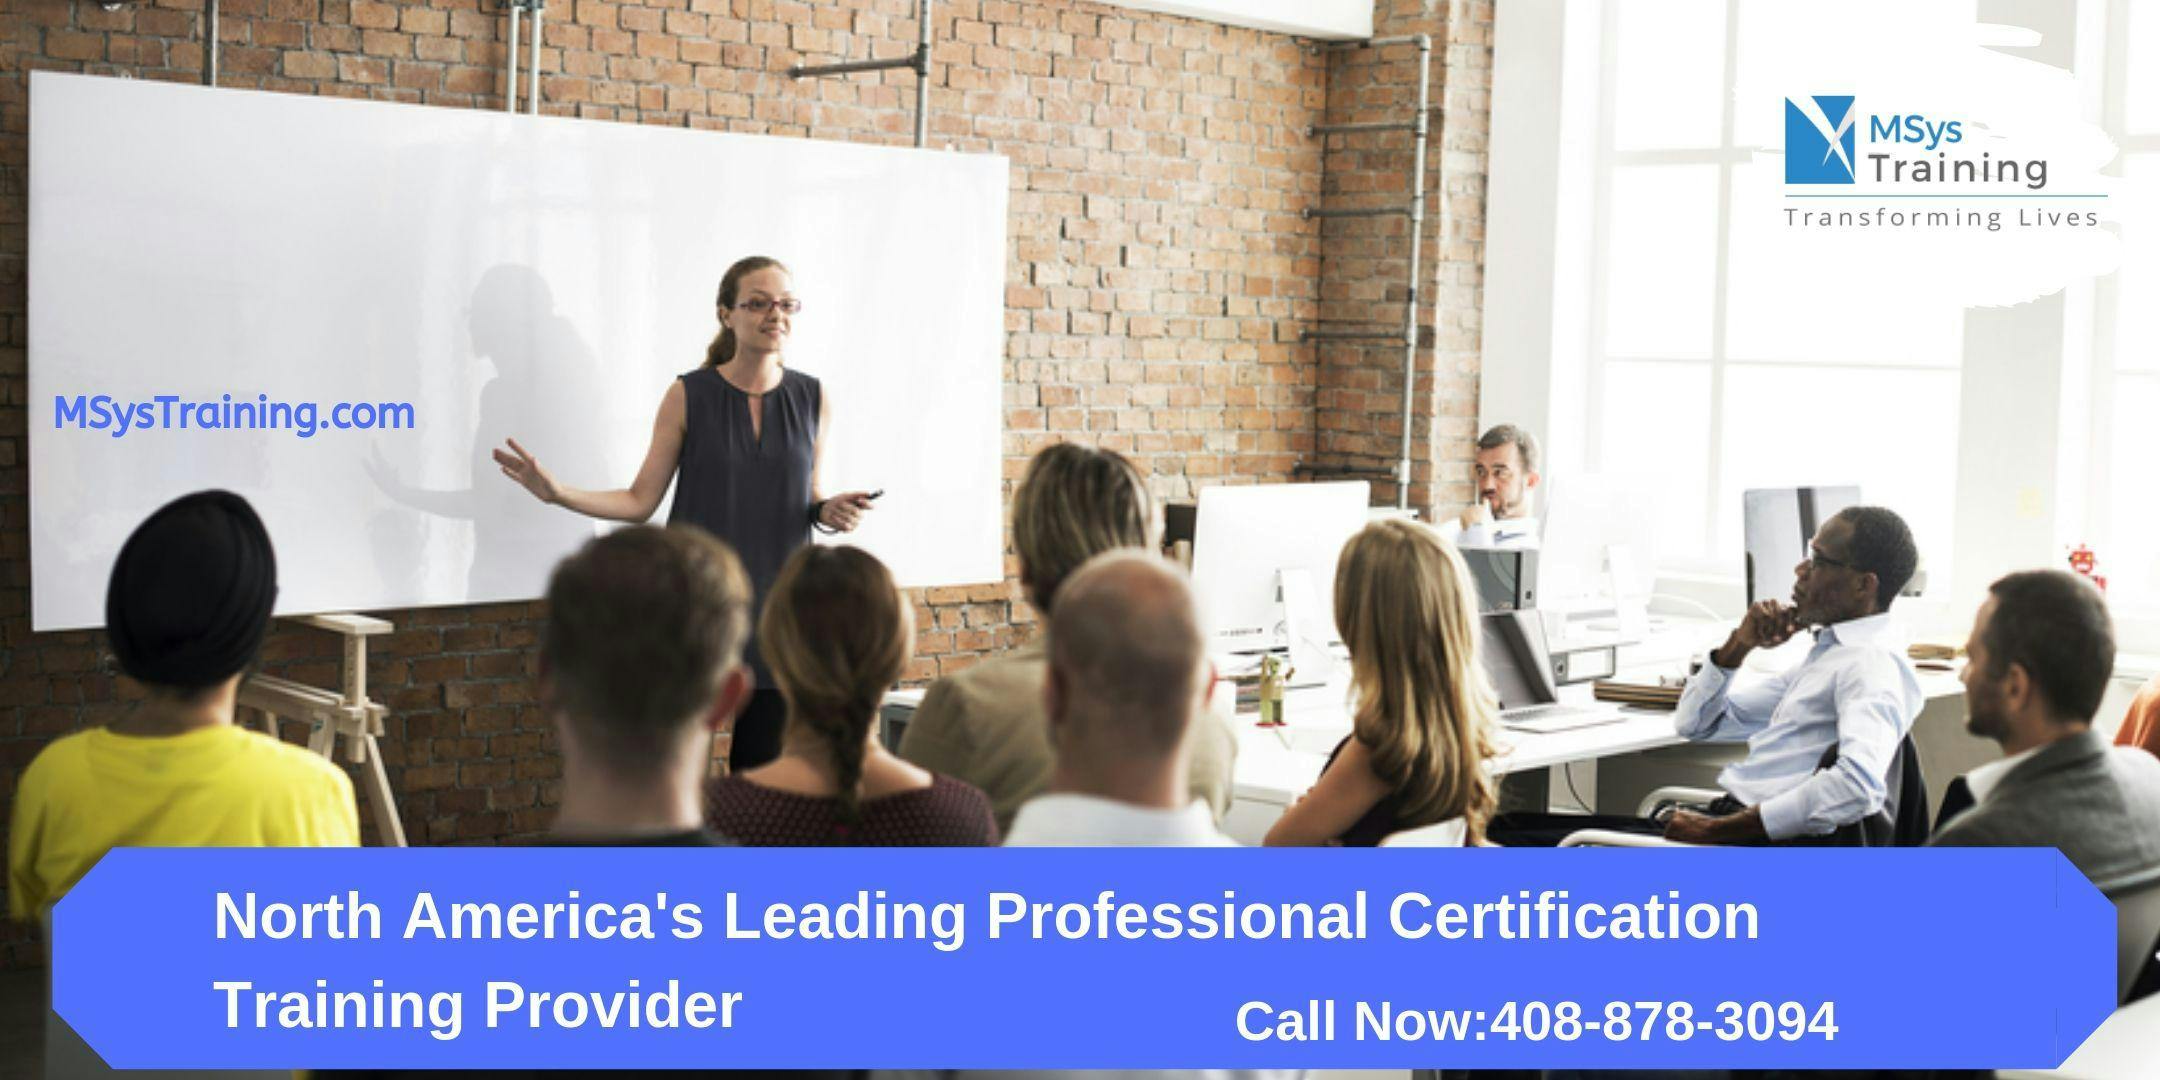 CAPM (Certified Associate in Project Management) Training In Inglewood, CA